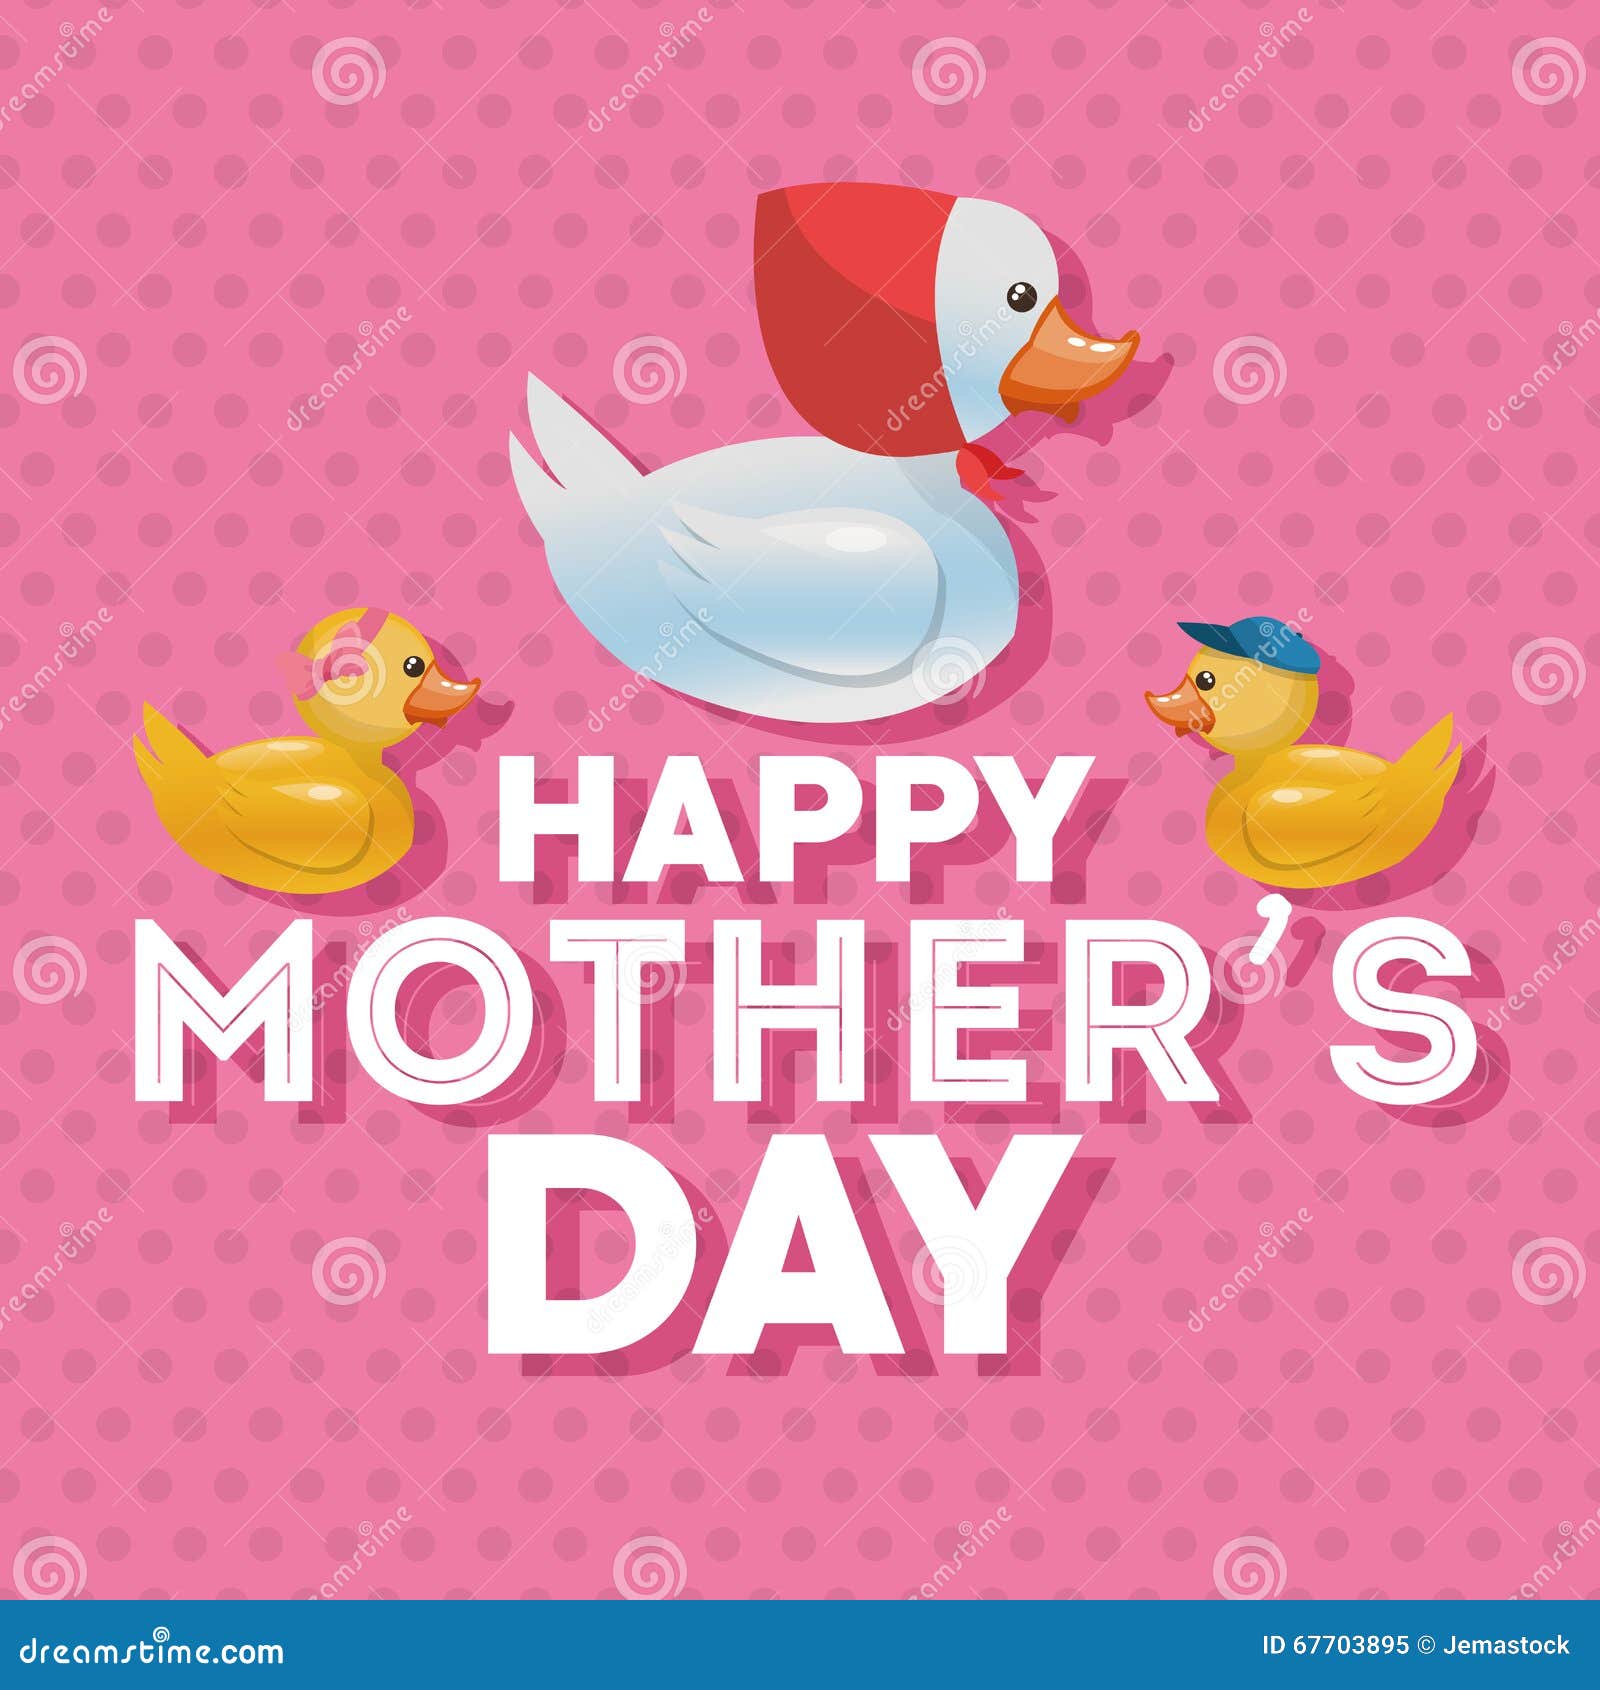 Download Happy Mothers Day Design Stock Vector - Image: 67703895